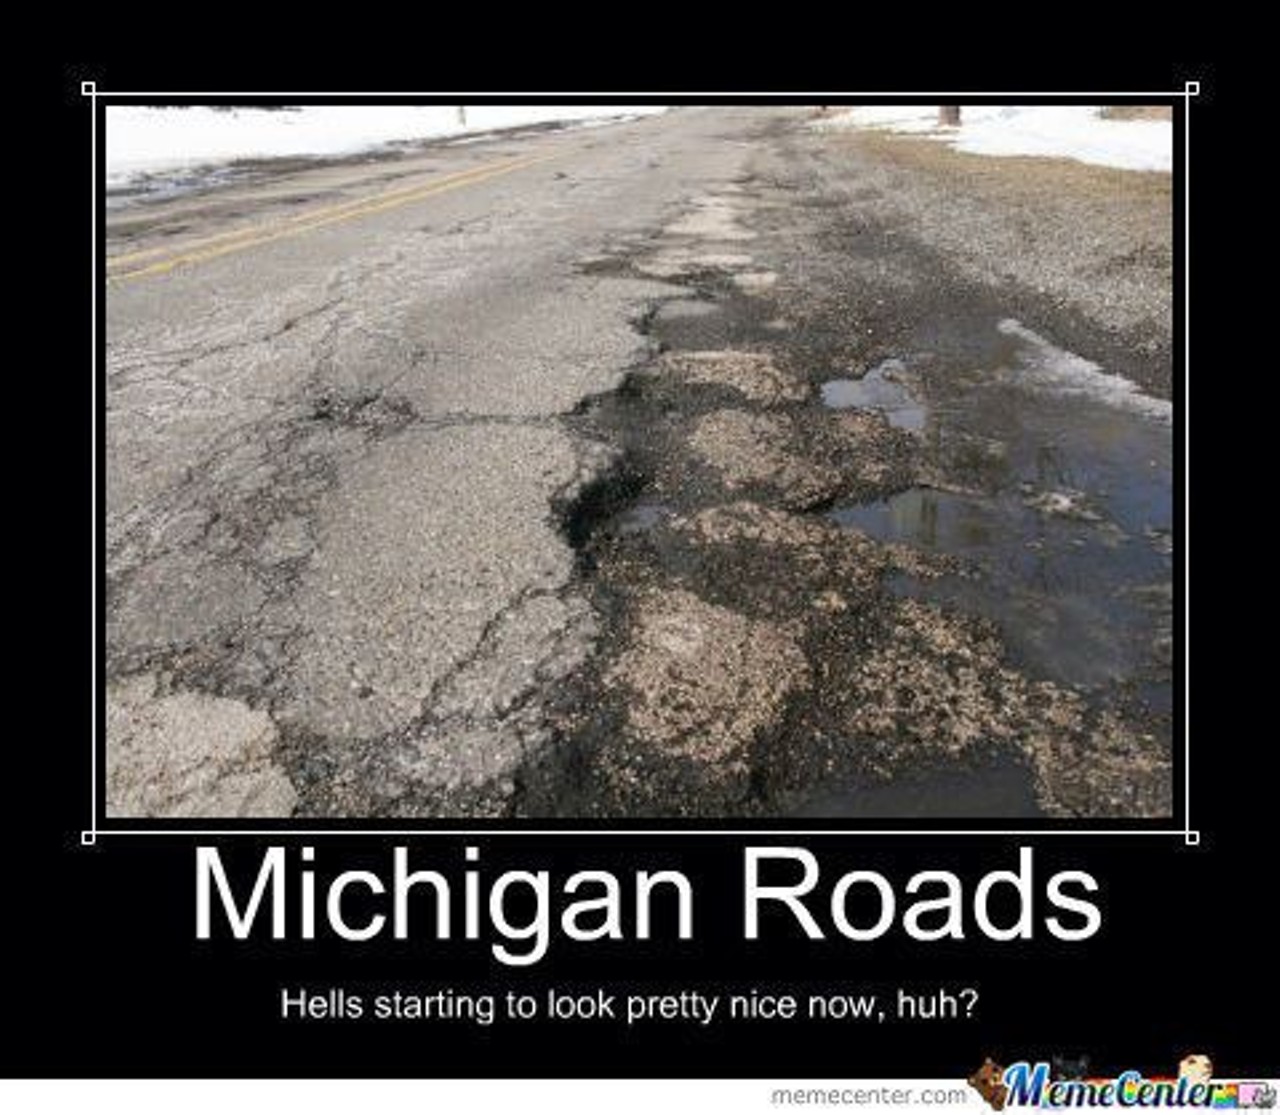 The roads in Hell are paved in... well, they're paved.